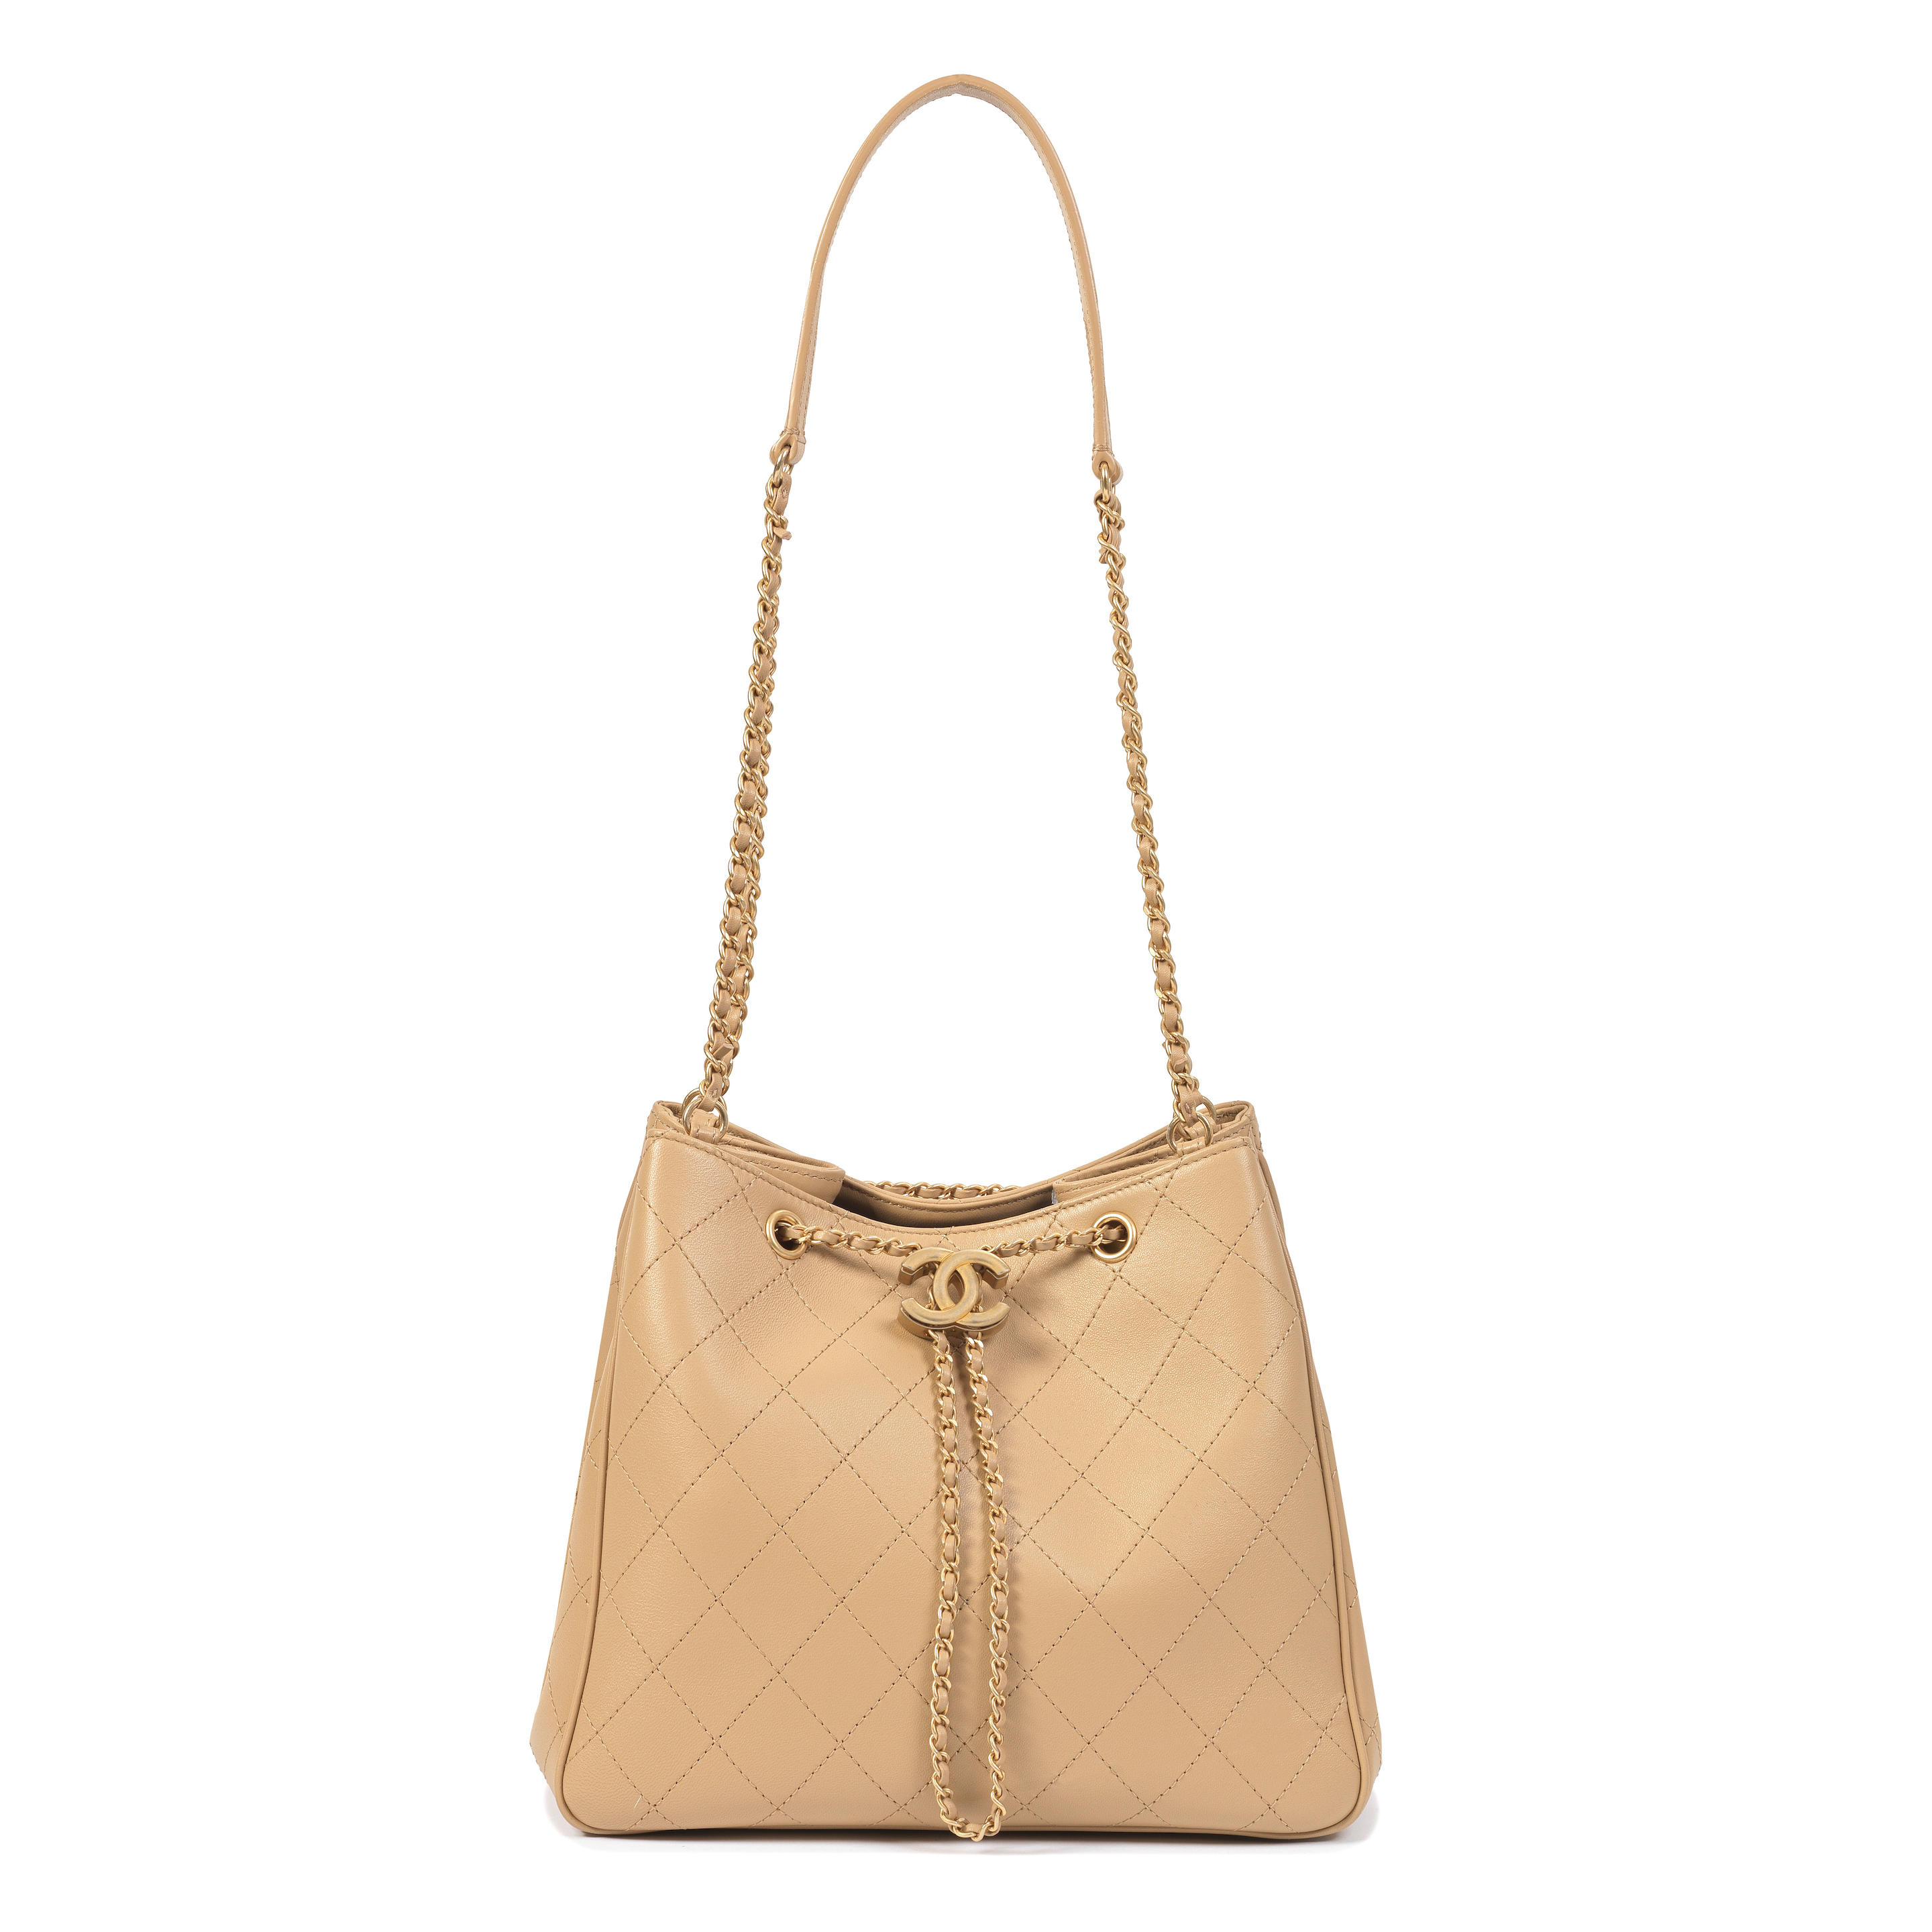 Bonhams : Chanel a Beige Calfskin Egyptian Amulet Drawstring Bucket Bag  2019 (includes serial sticker, authenticity card and dust bag)